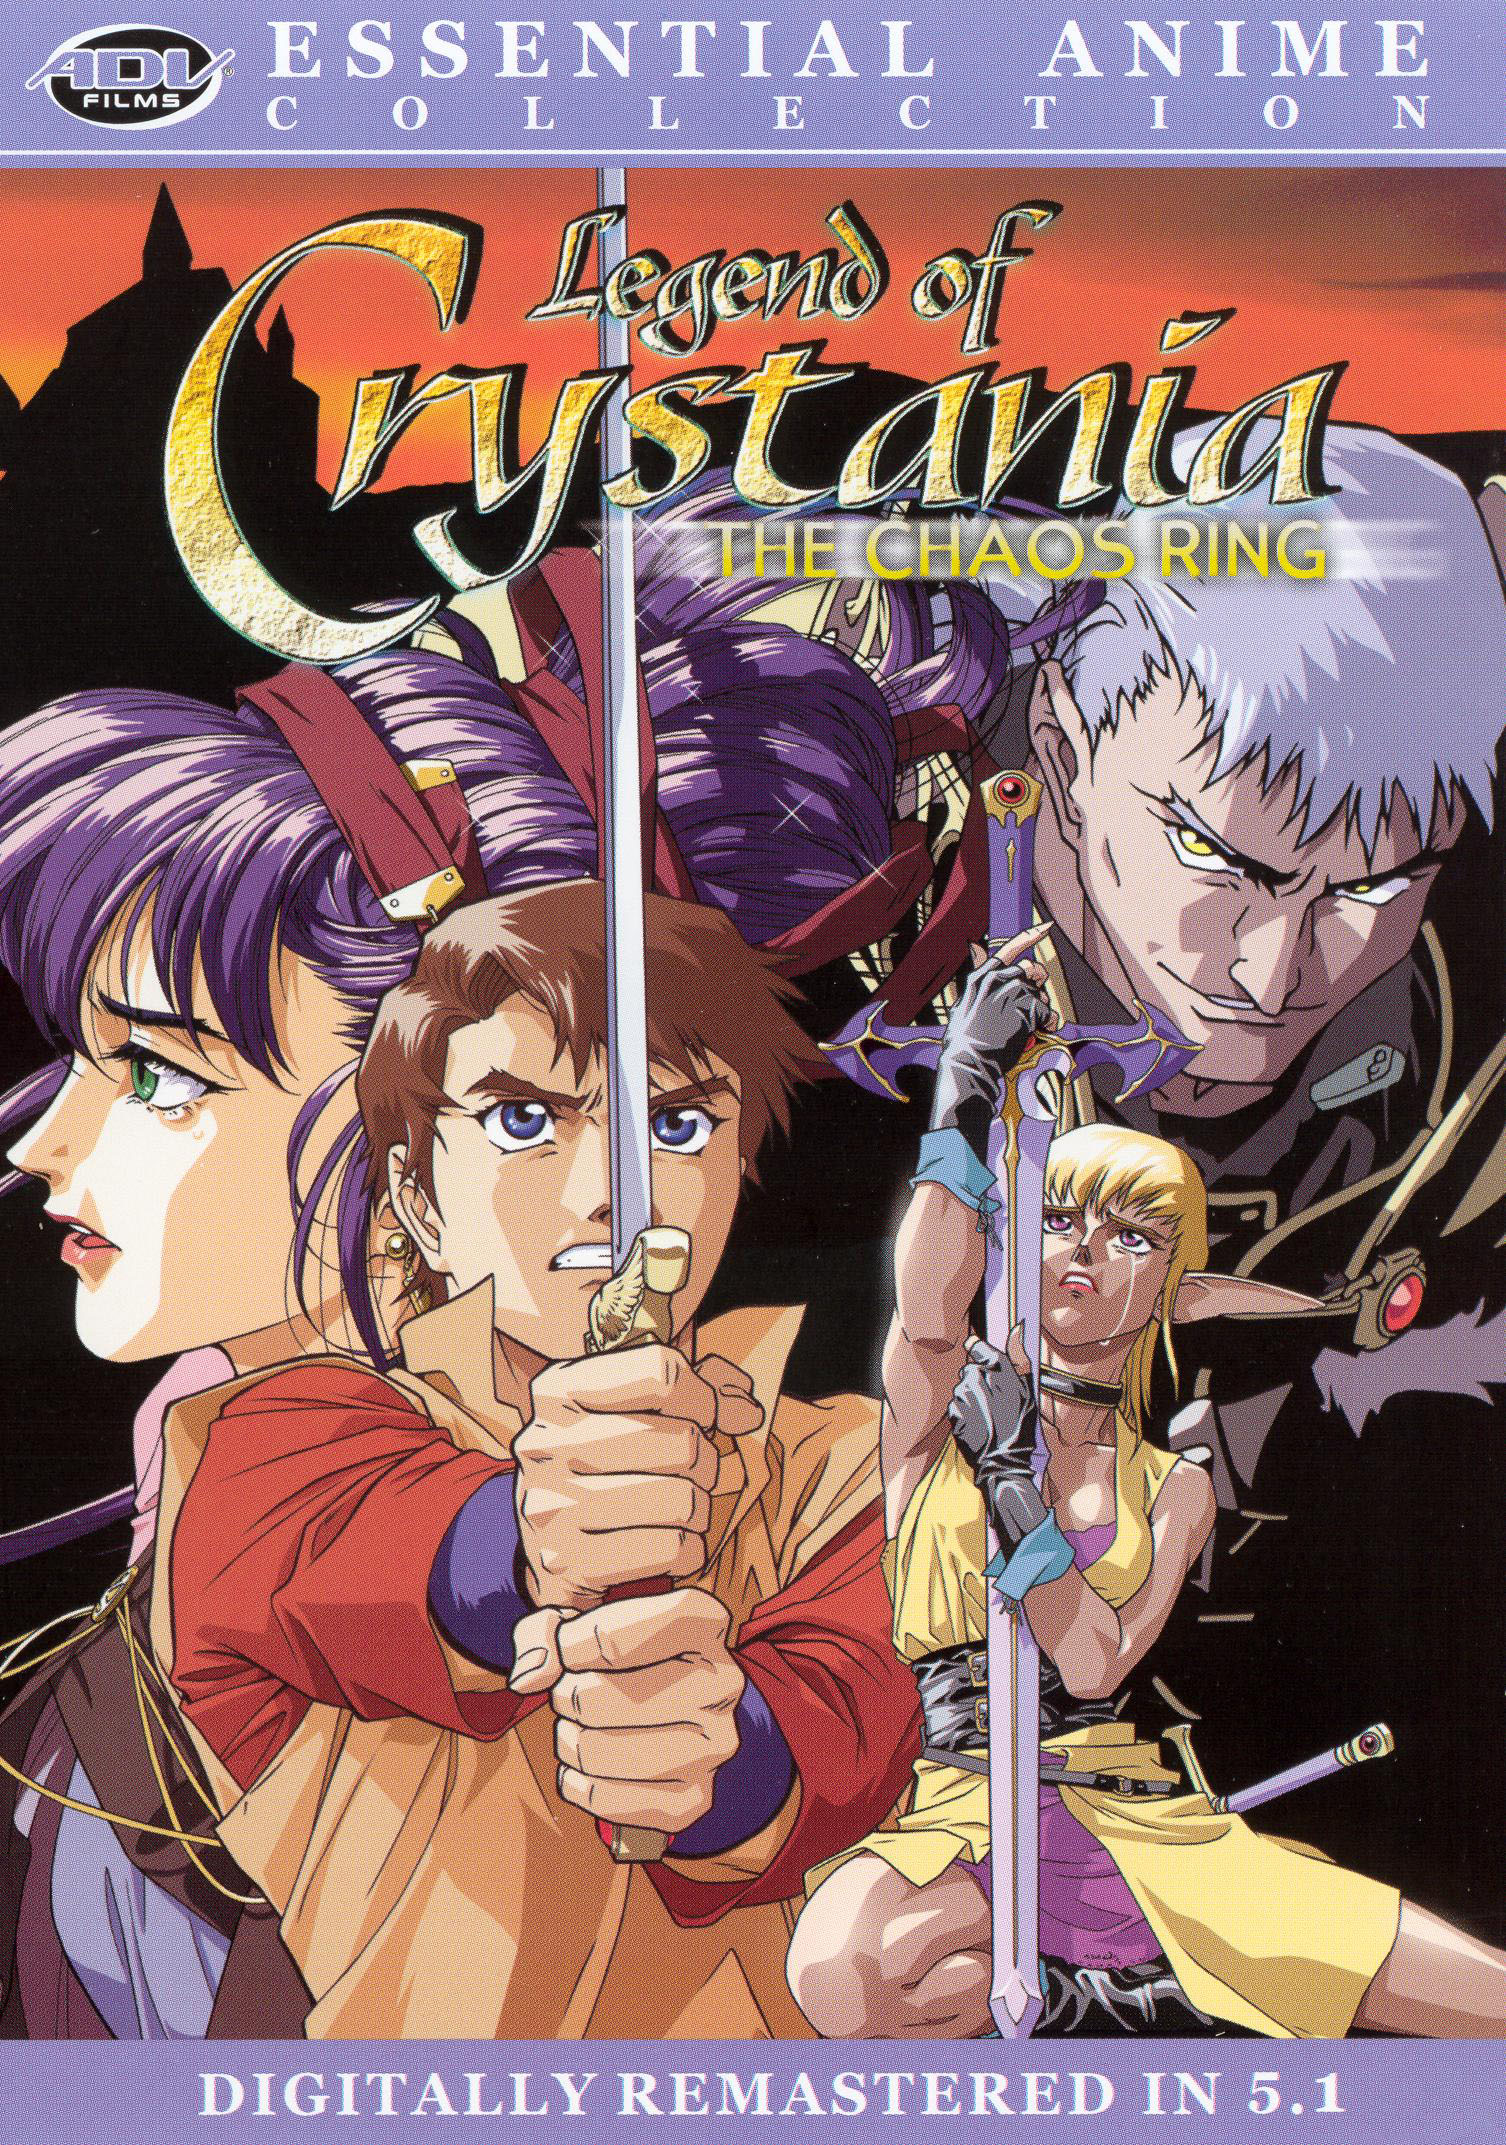 Best Buy: Legend of Crystania: The Chaos Ring [DVD]